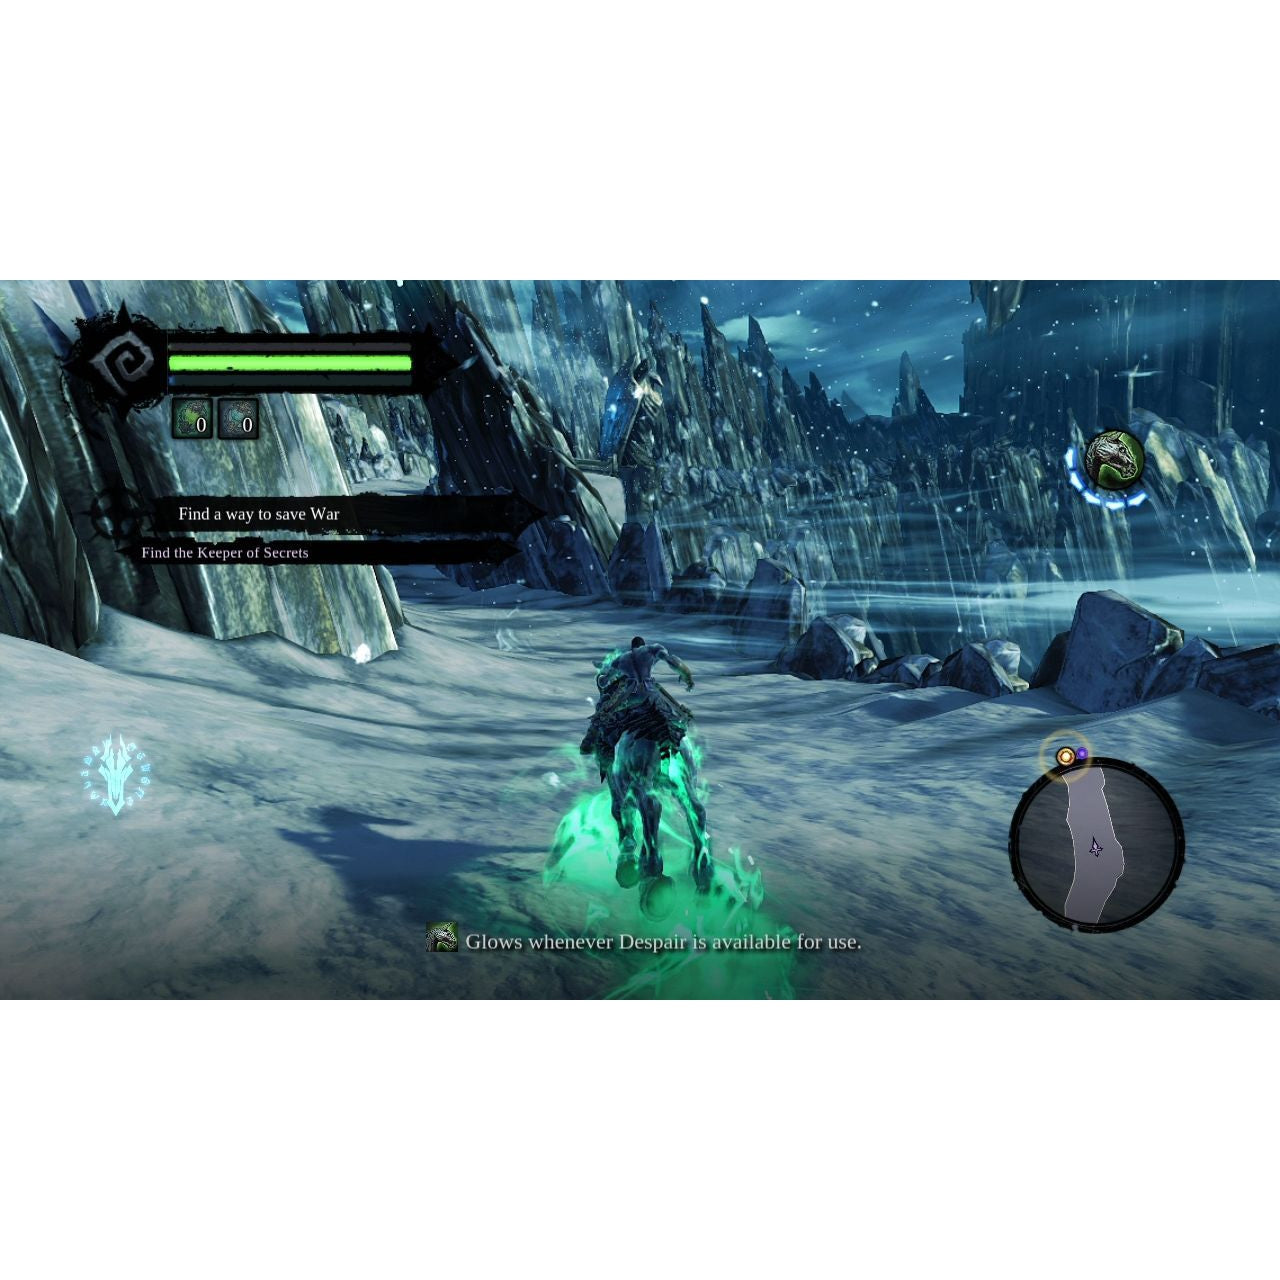 Darksiders II (Limited Edition) - PlayStation 3 (PS3) Game Complete - YourGamingShop.com - Buy, Sell, Trade Video Games Online. 120 Day Warranty. Satisfaction Guaranteed.